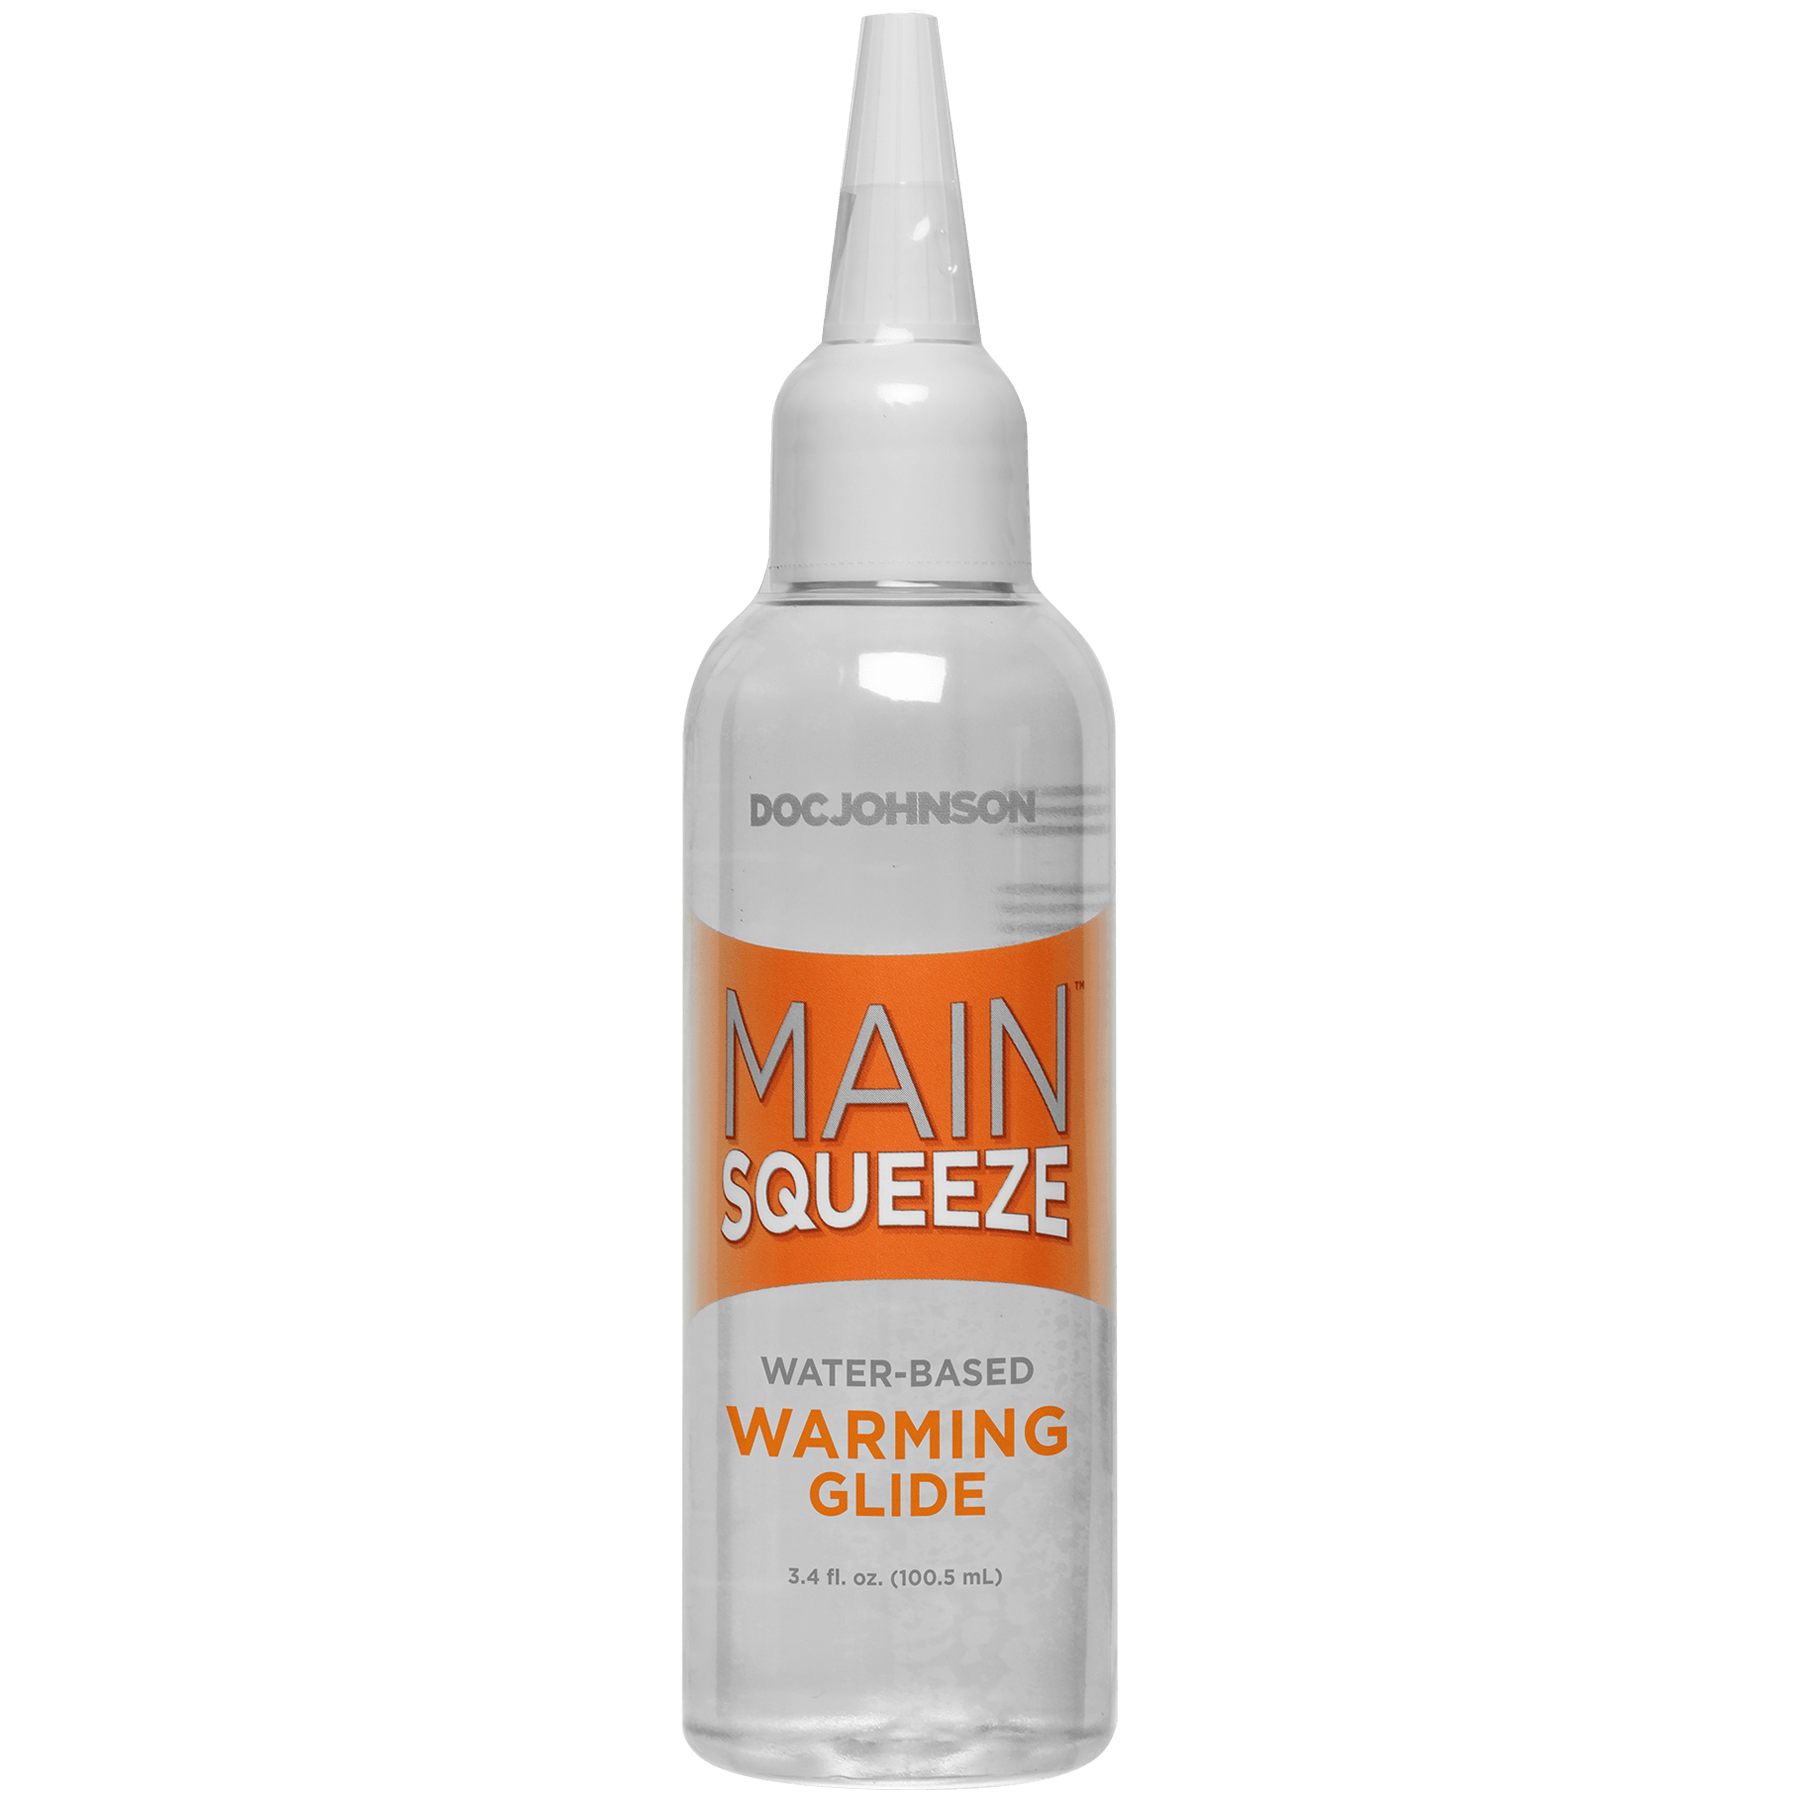 Doc Johnson Main Squeeze Warming Water Lube - Buy At Luxury Toy X - Free 3-Day Shipping